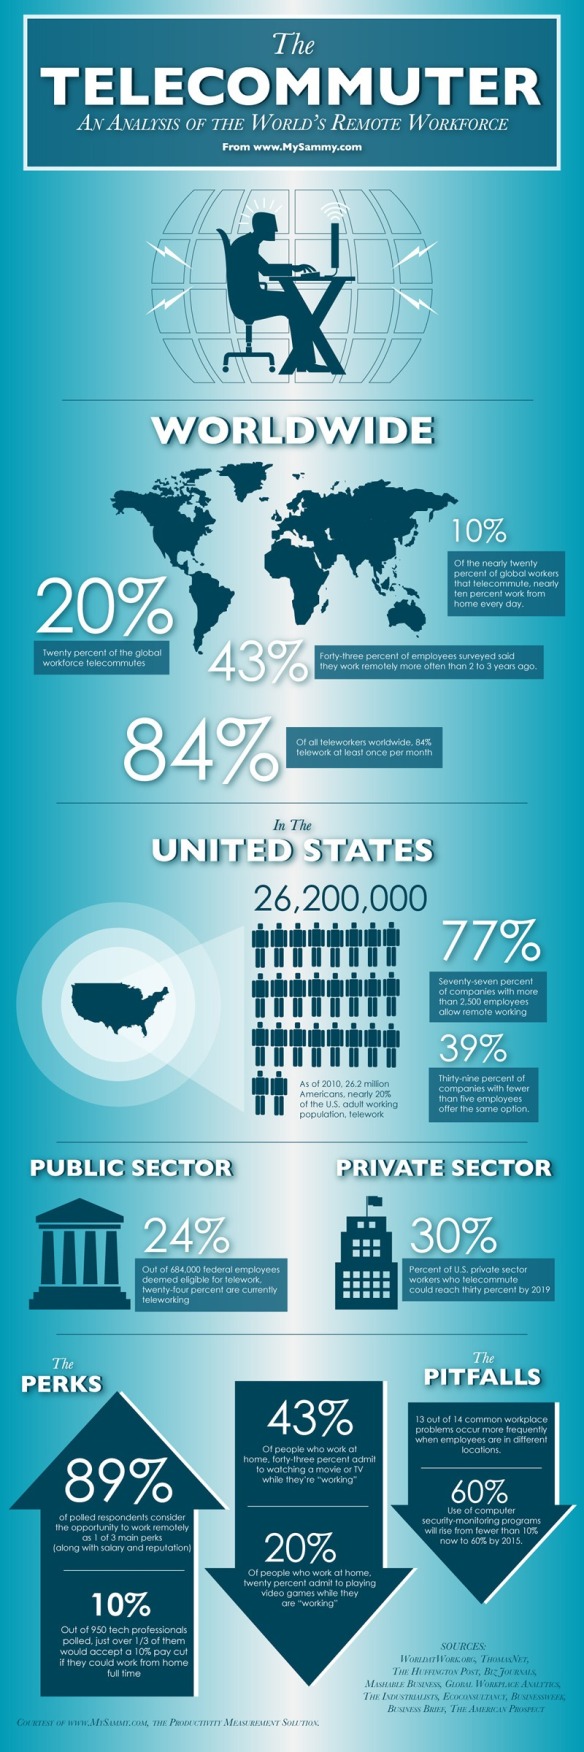 Infographic from www.mashable.com